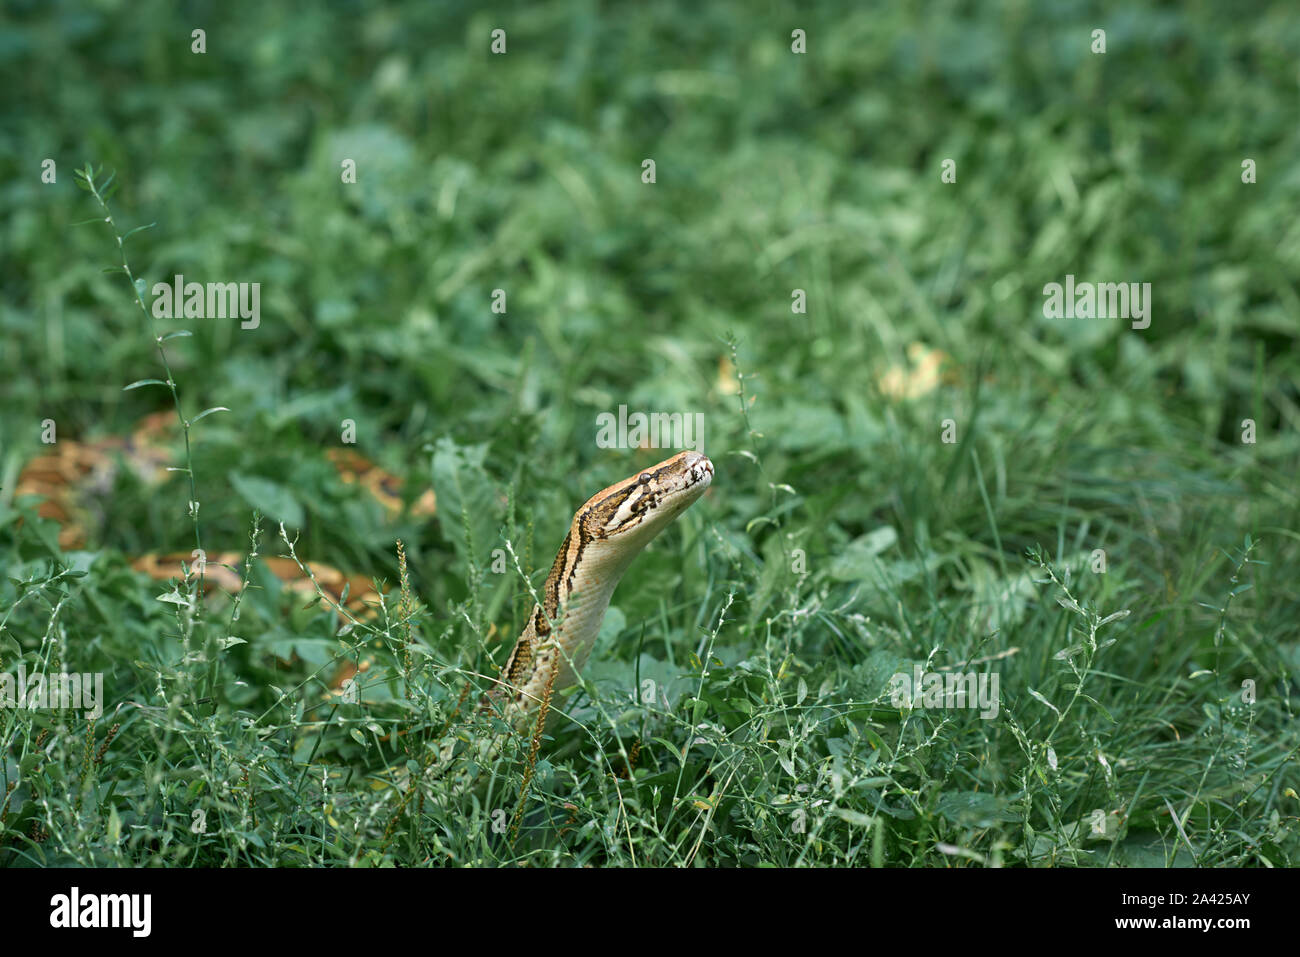 Dangerous, scary snake creeping and crawling. Phyton lying on greenery of garden. Stock Photo